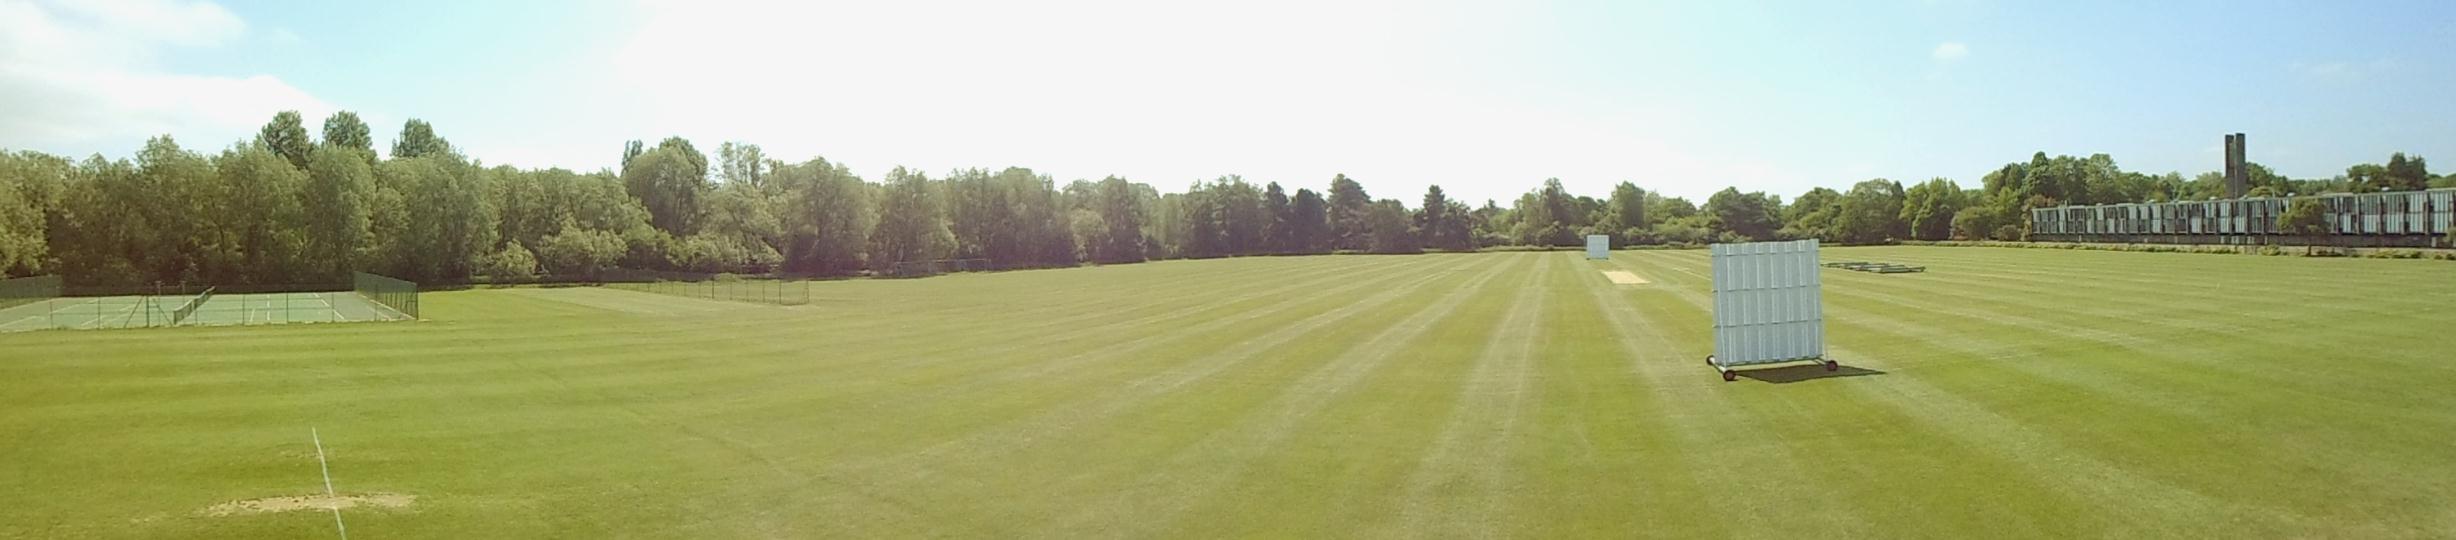 Merton College Playing Fields, Spring 2018